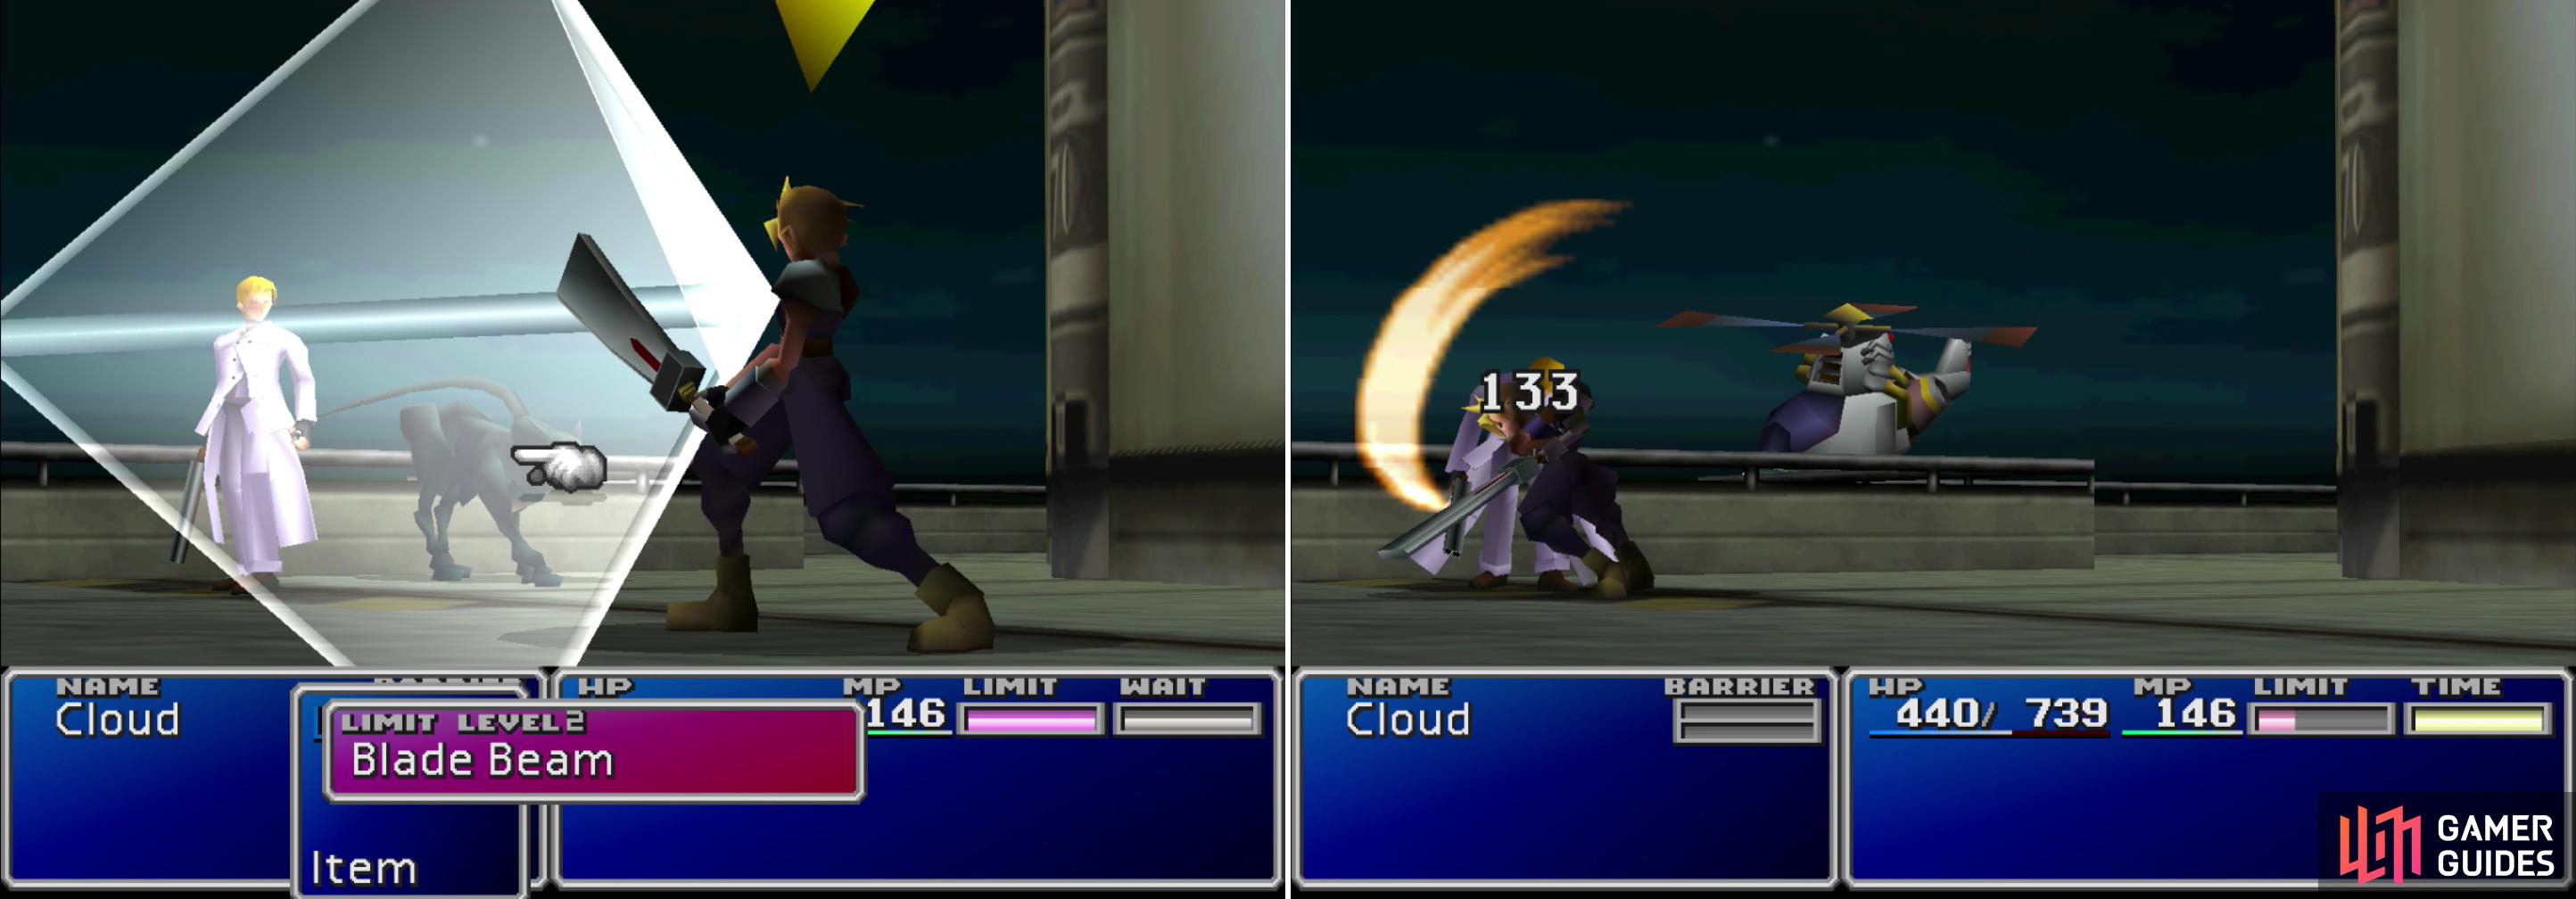 Rufus's pet Dark Nation will start out the fight by protecting its master (left). In the long run, however, Rufus can't trade blows for Cloud in a one-on-one engagement (right).